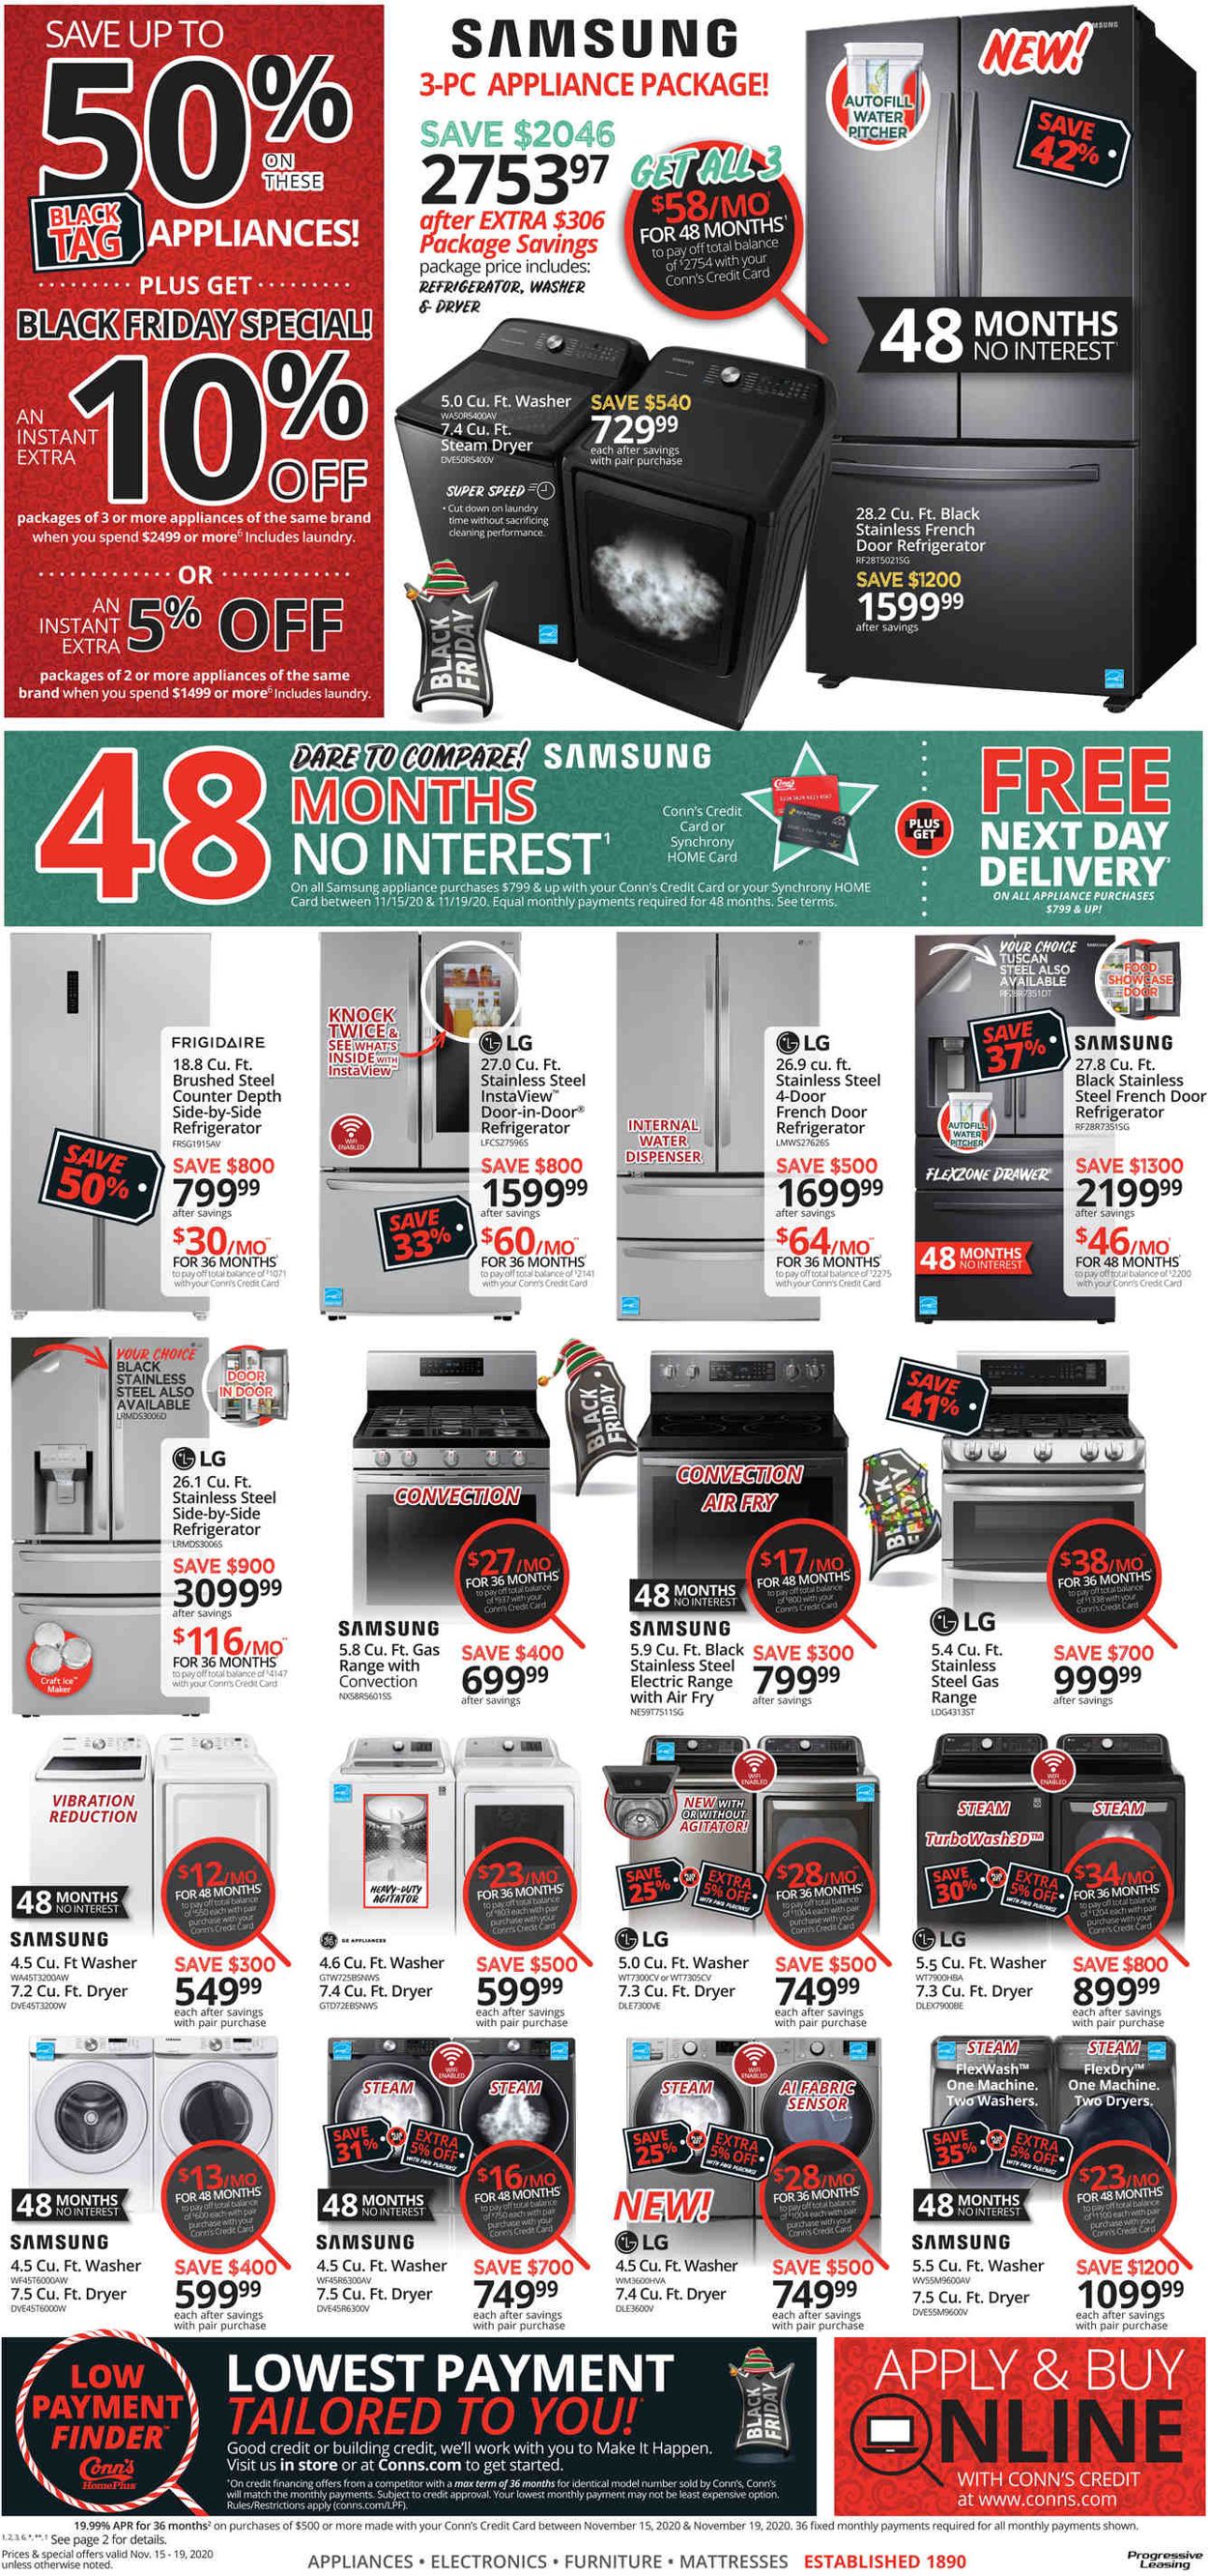 Conn's Home Plus Black Friday 2020 Weekly Ad Circular - valid 11/15-11/19/2020 (Page 4)